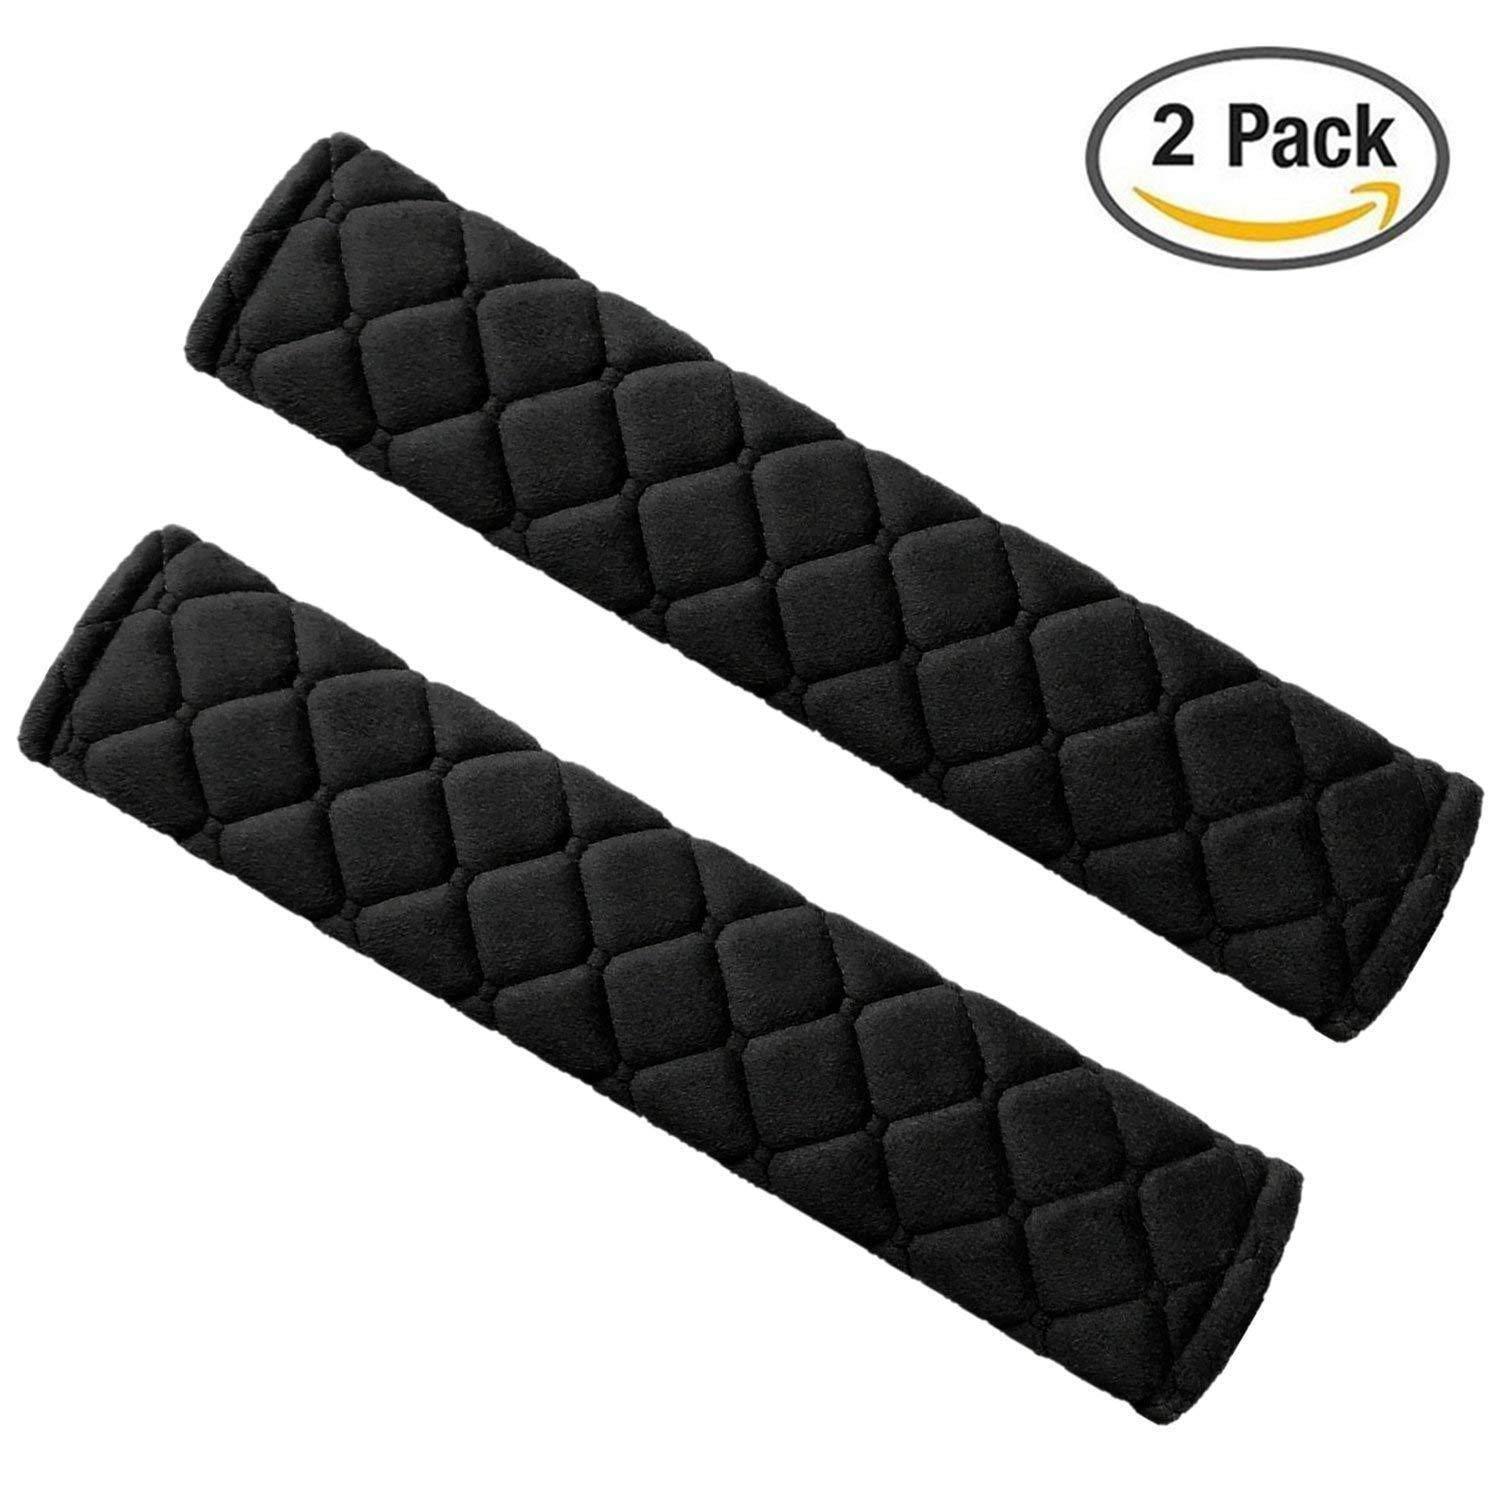 Auto Car PU Seat Belt Pads Shoulder Strap Backpack Cover Protector Soft 